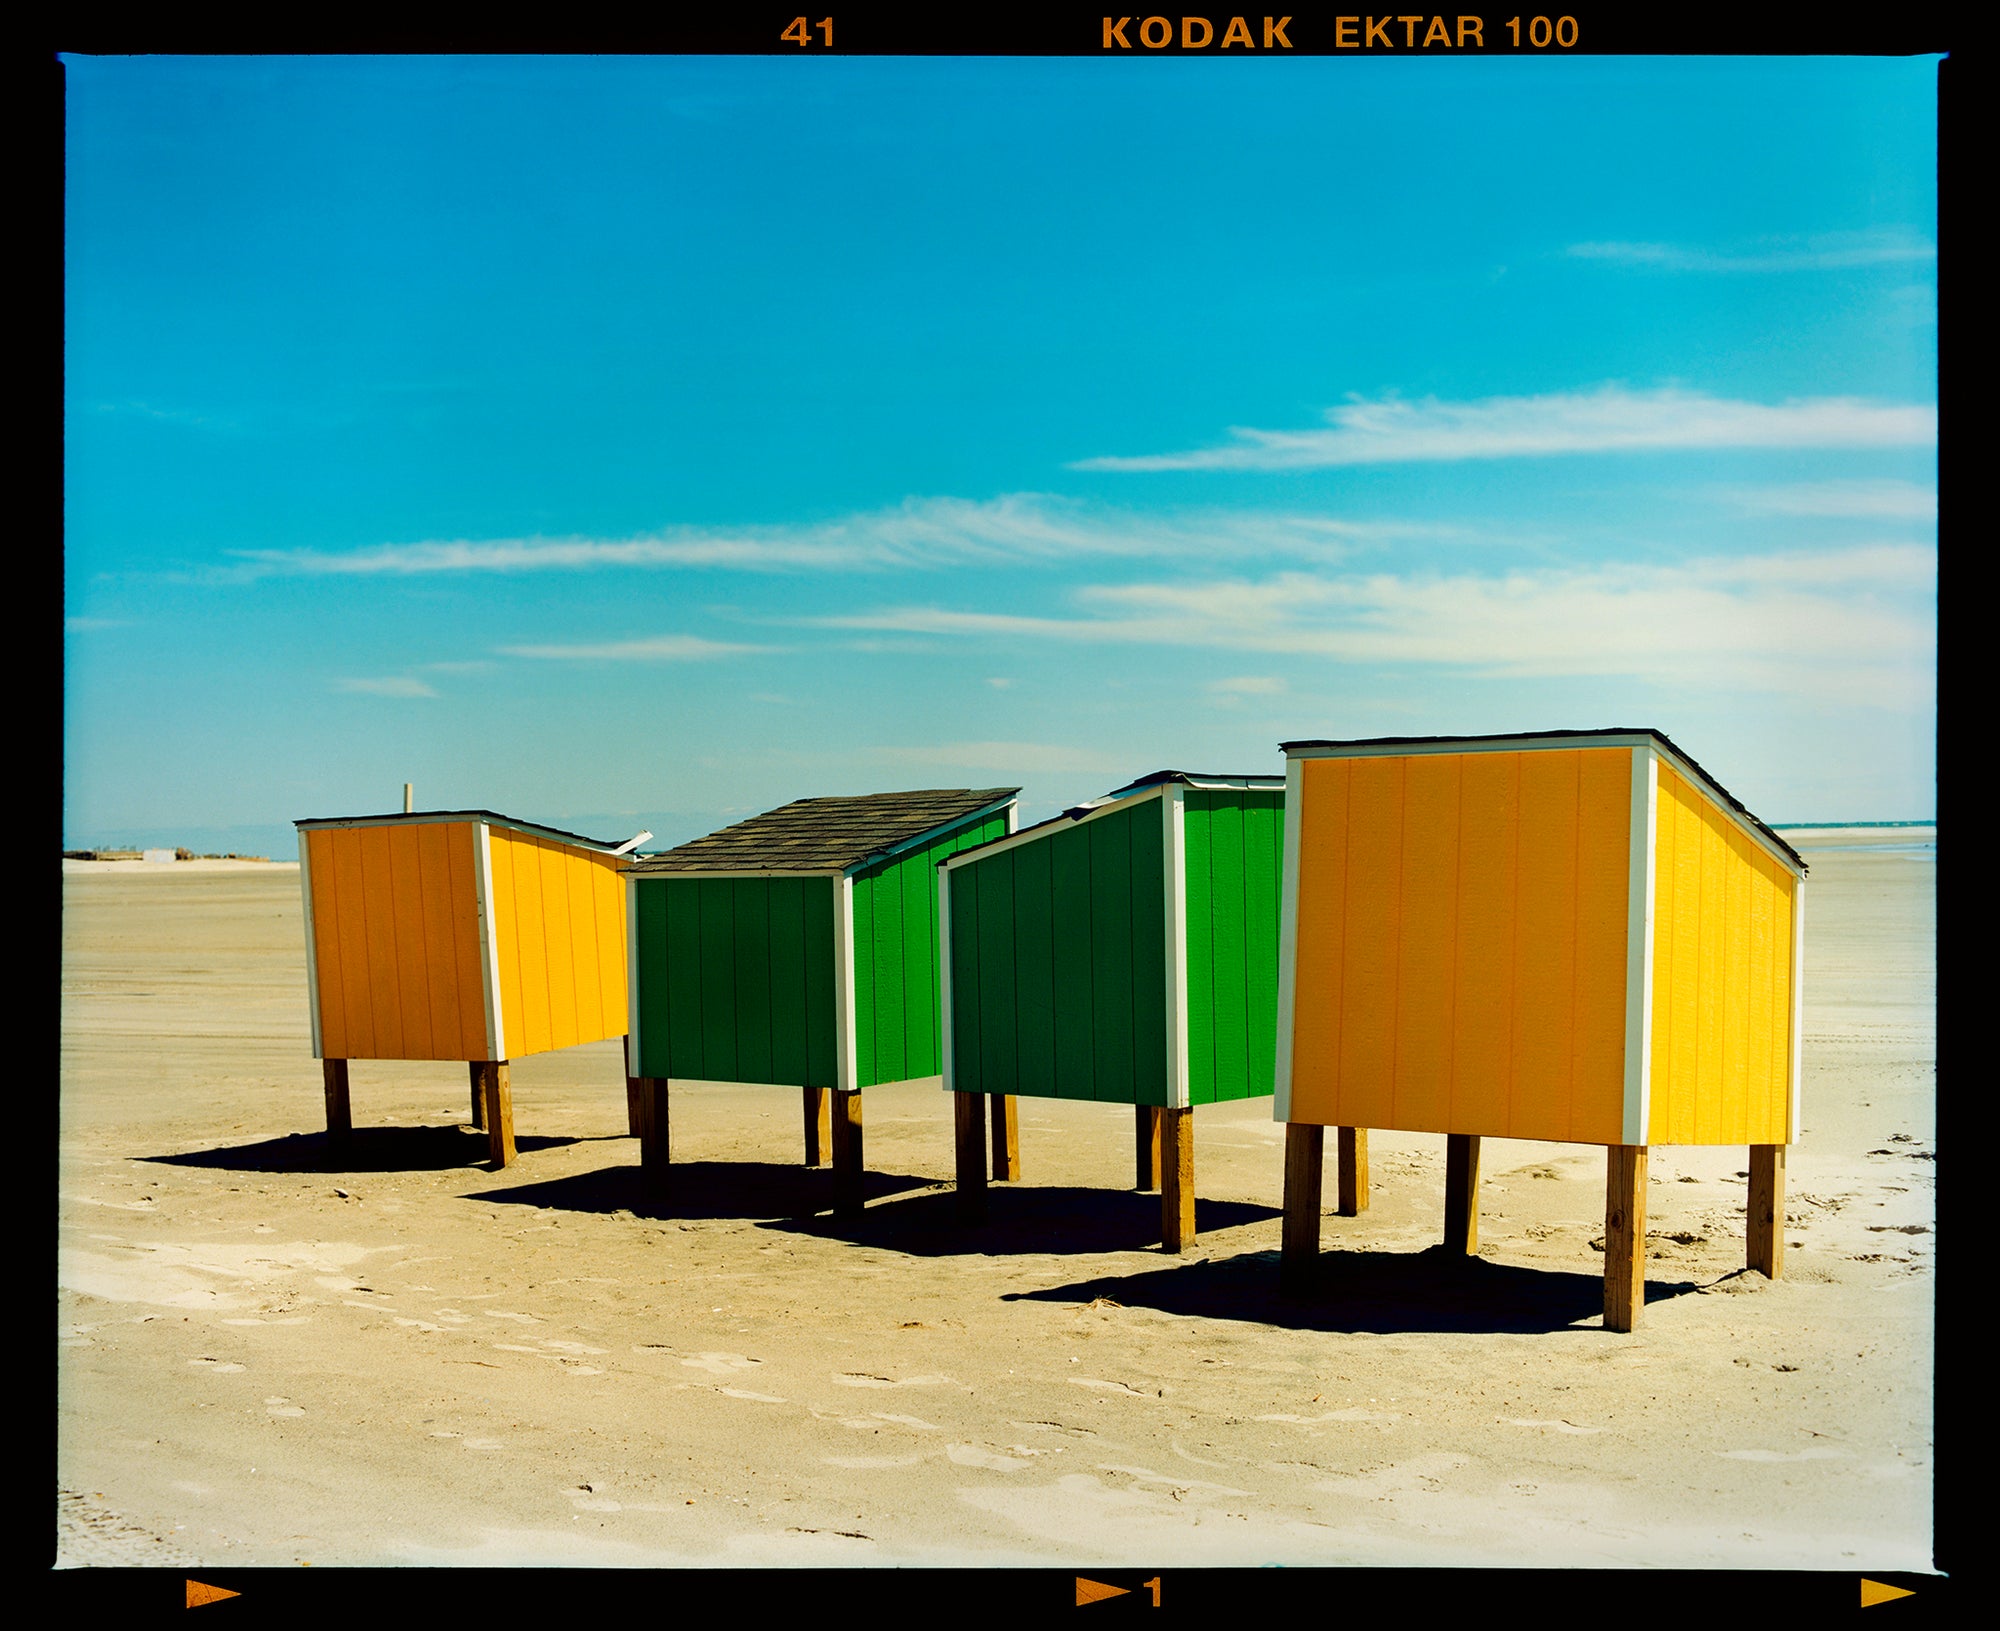 Photograph by Richard Heeps. Yellow and green beach lockers stand on their wooden legs on the clear sandy beach.